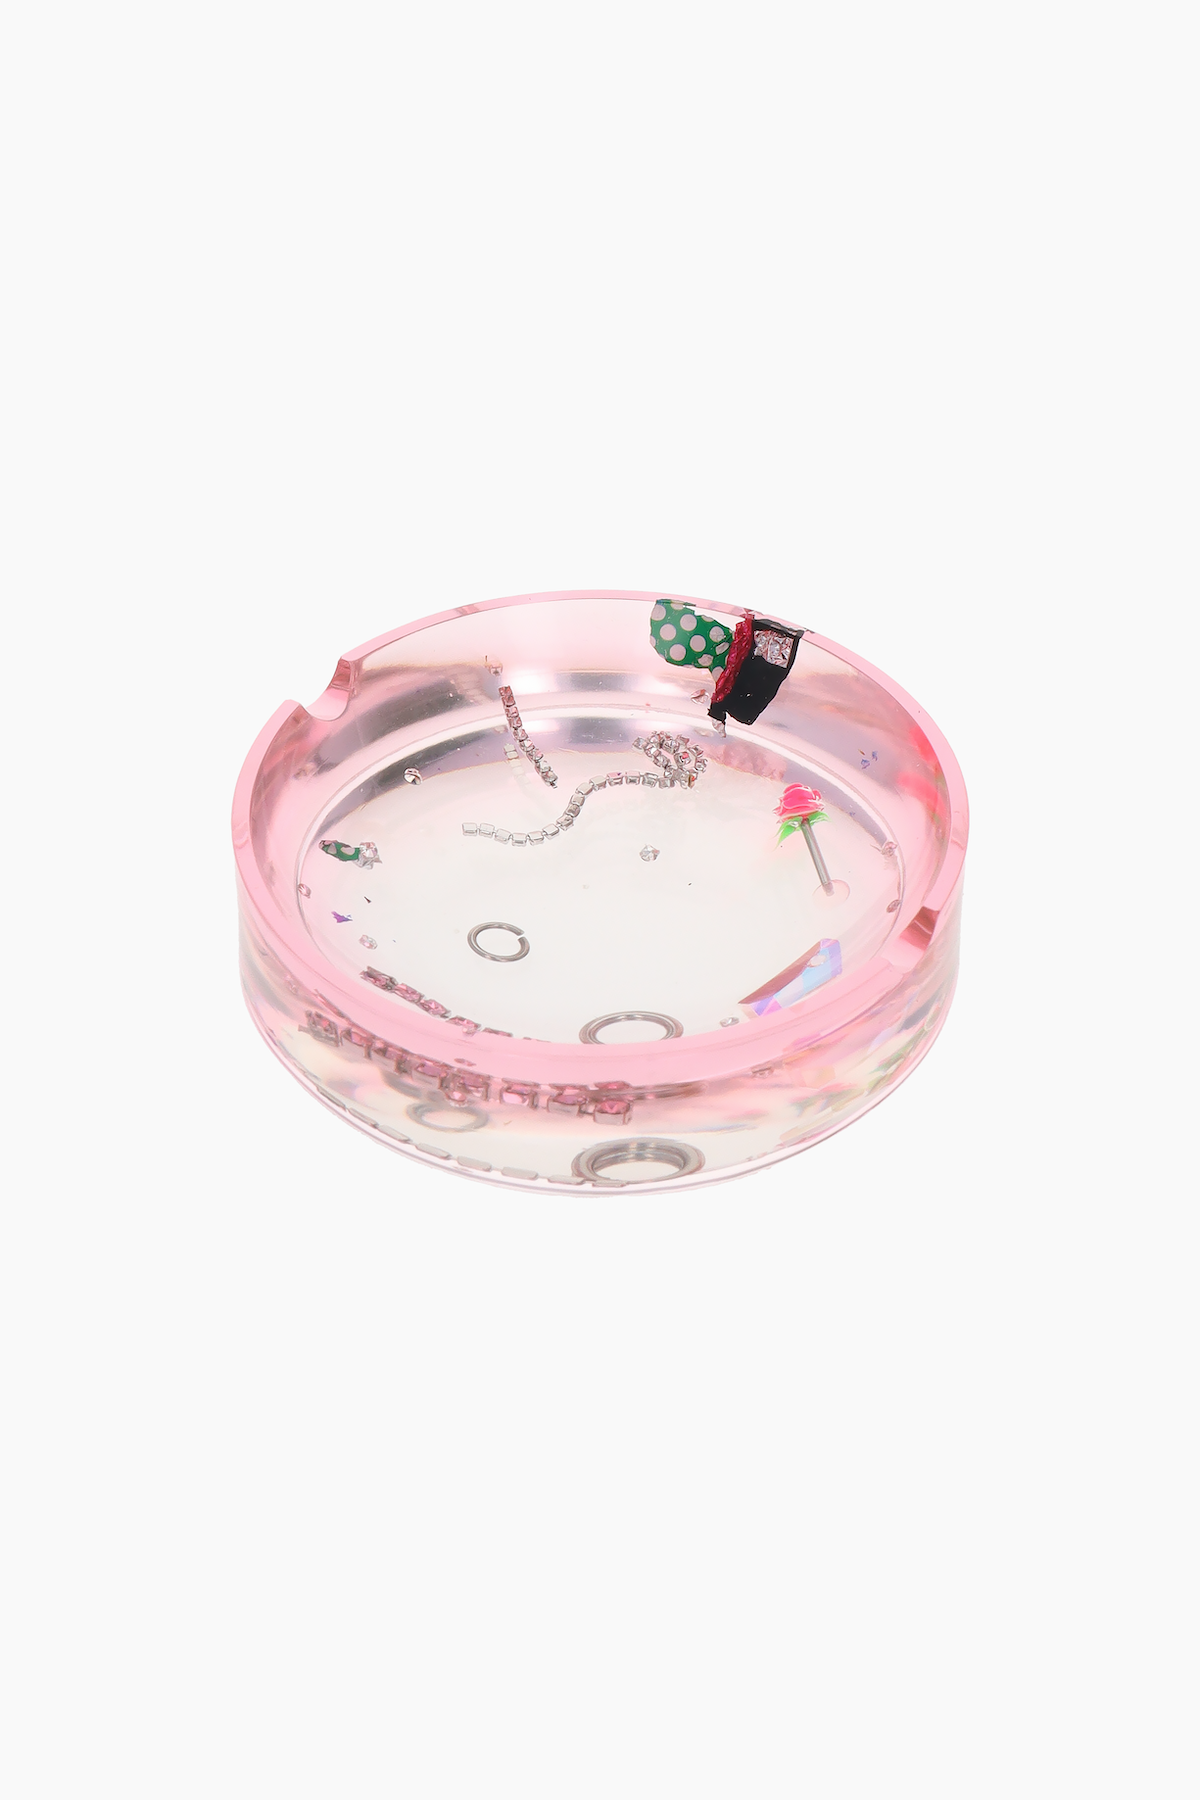 Pink rounded dish